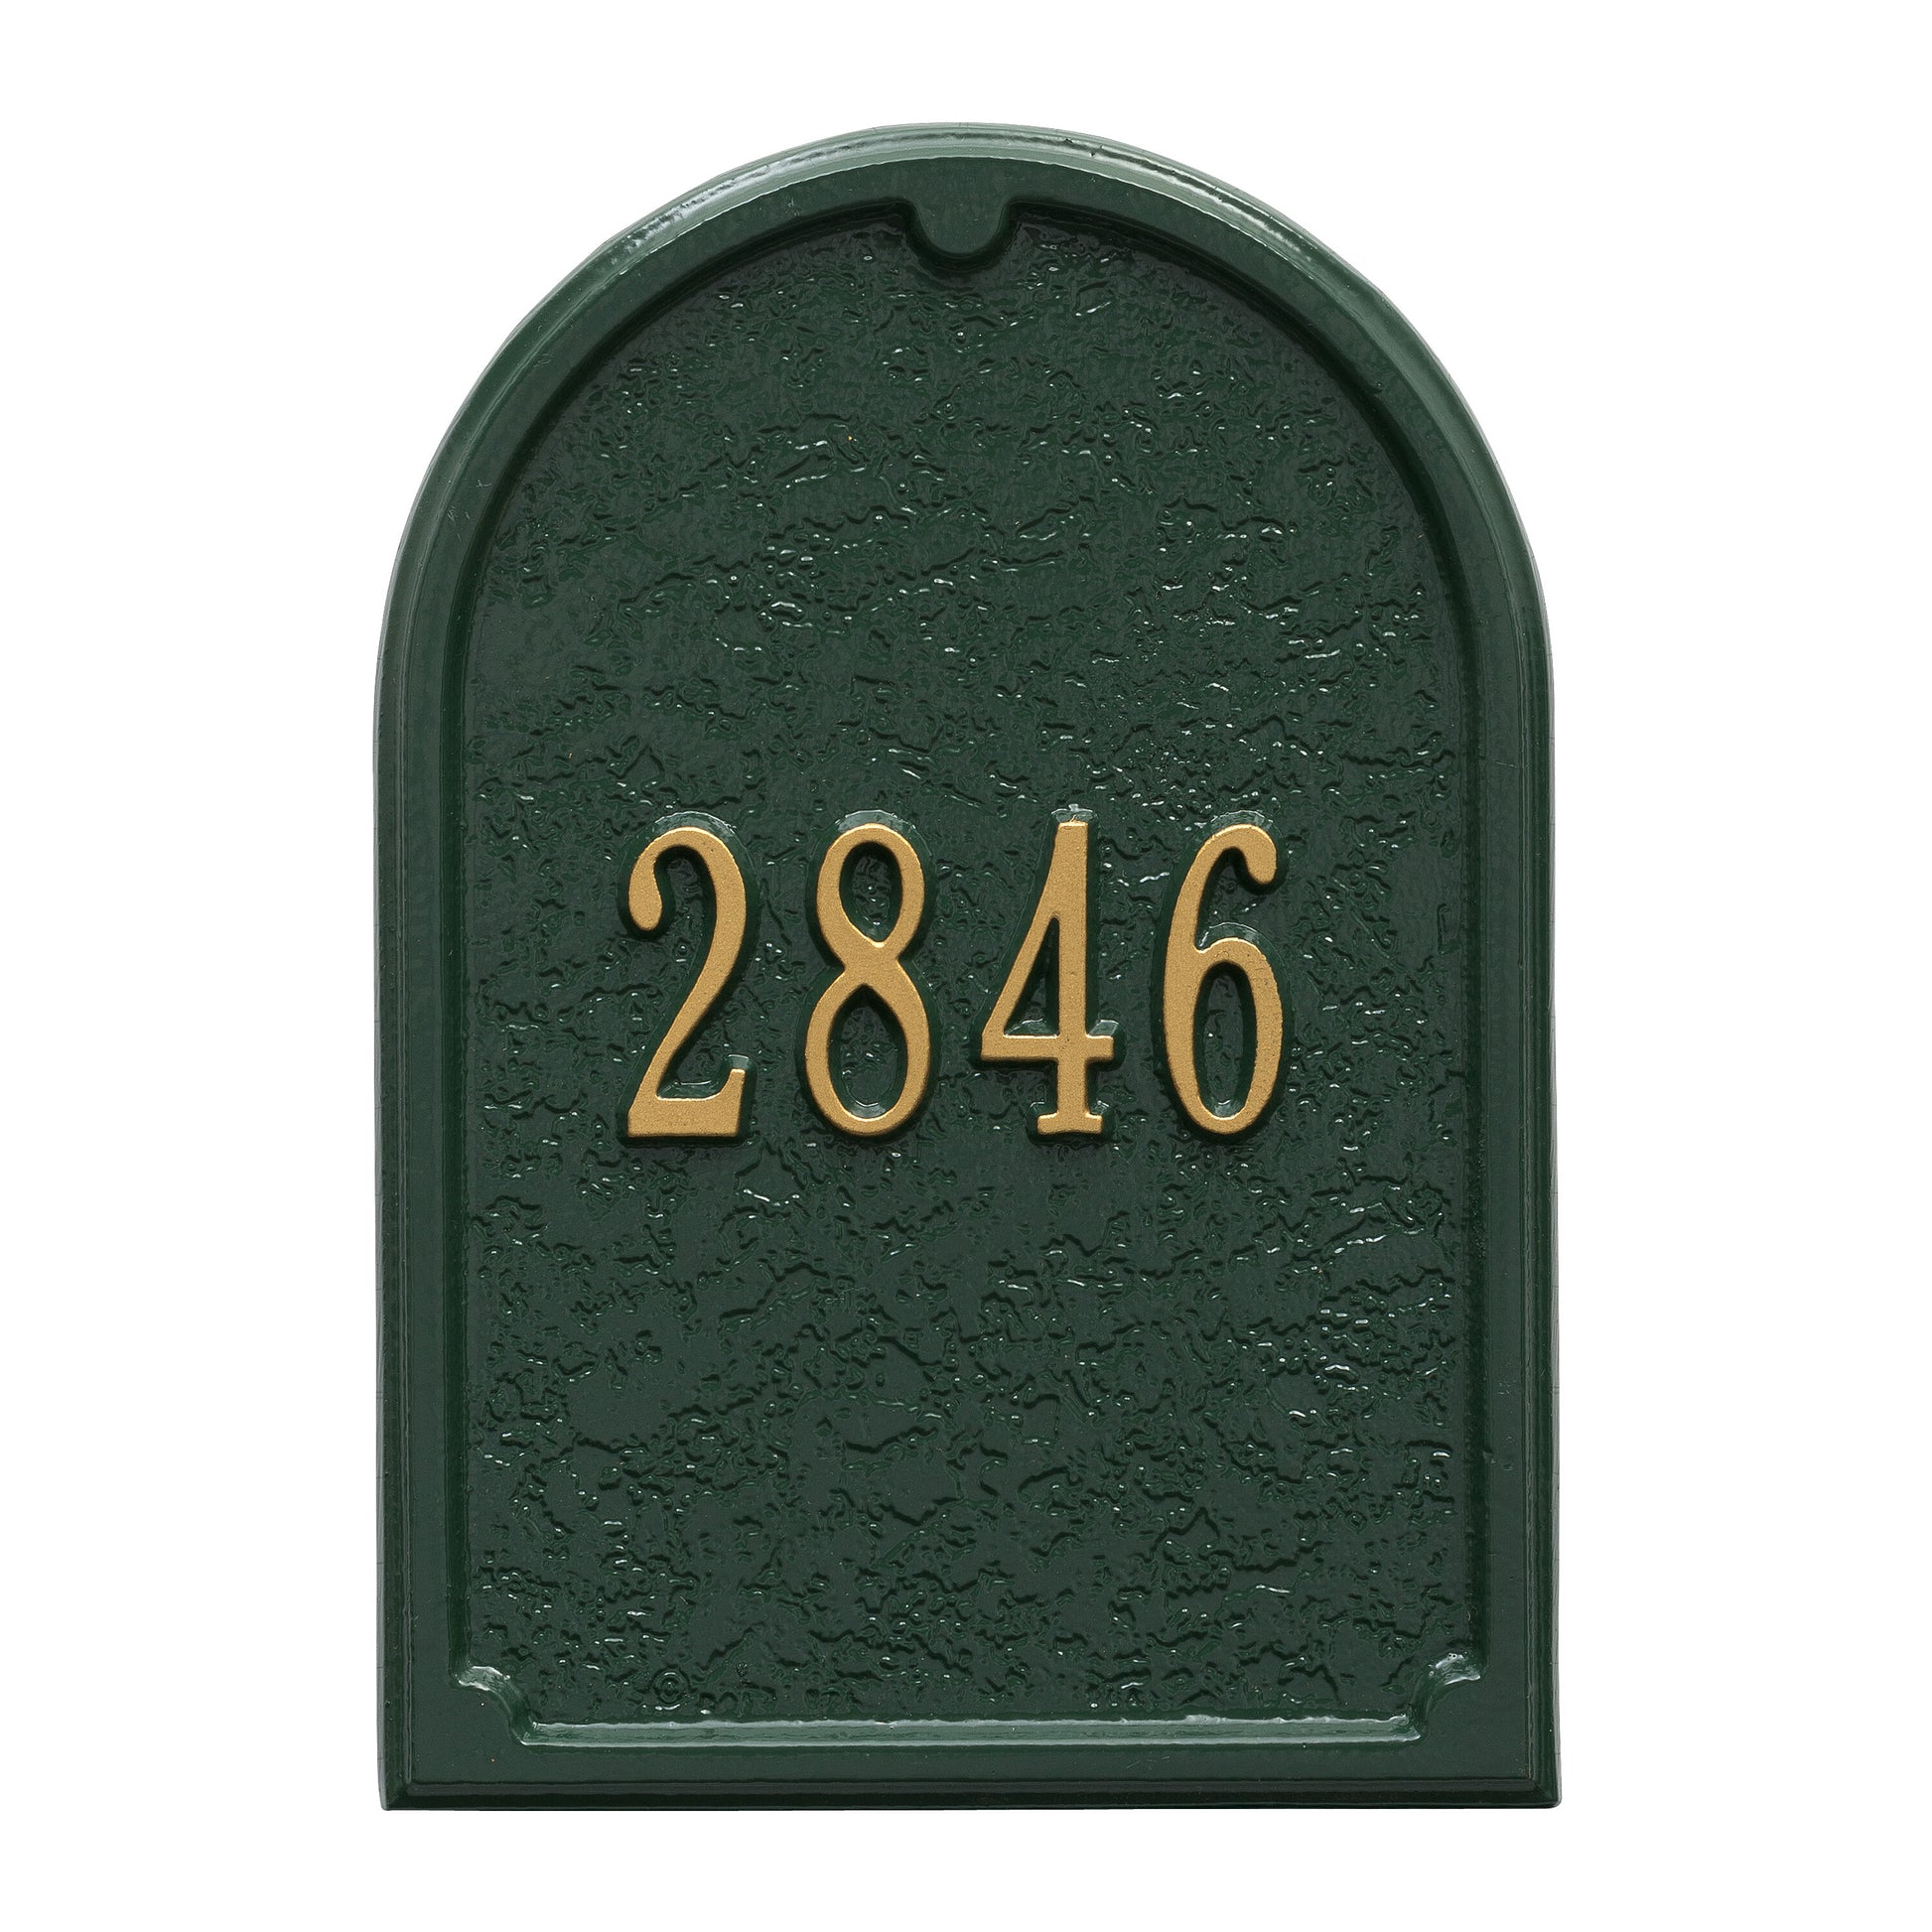 Whitehall Products Personalized Mailbox Door Personalized Door Plaque Bronze/gold